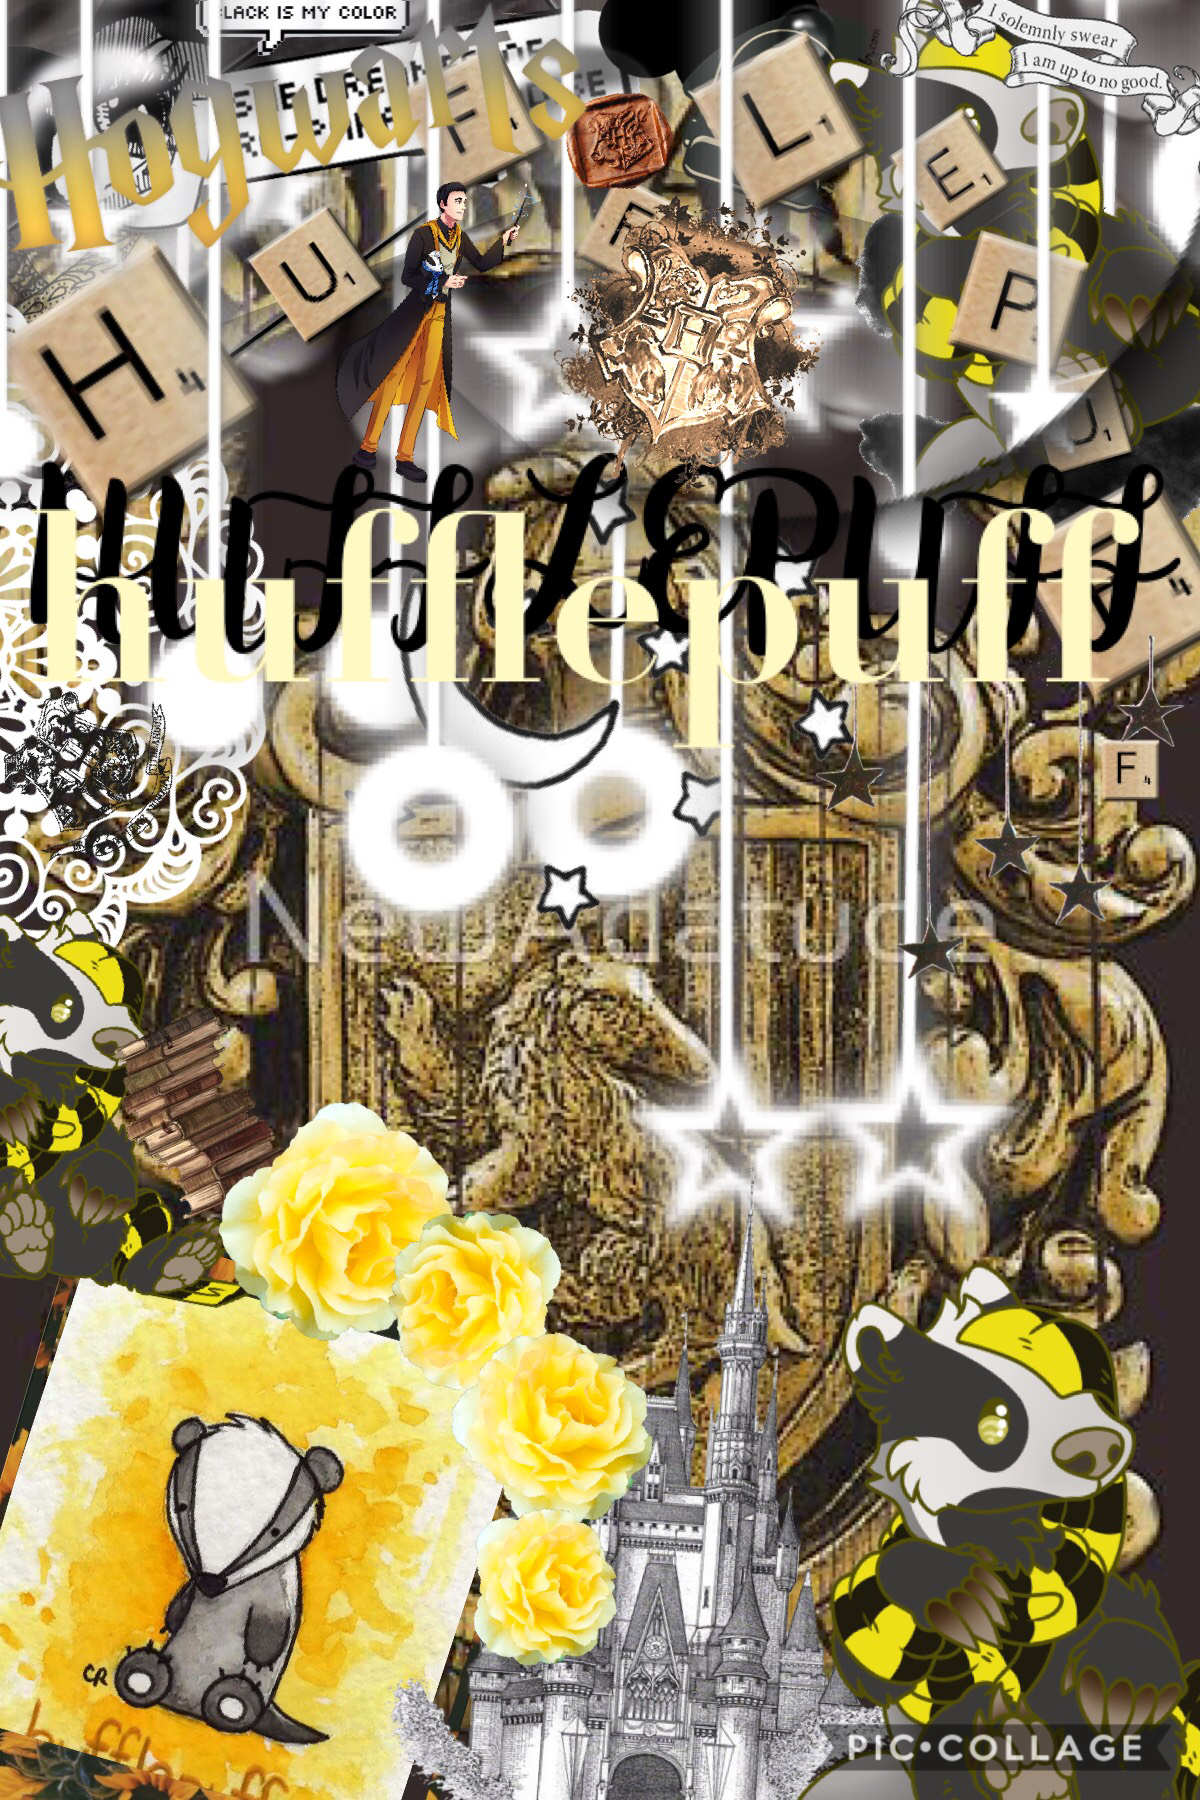 BAM! another 50 scrap collage! This took a span of DAYS. Whooooo! Lol, a complex collage for 510 followers.